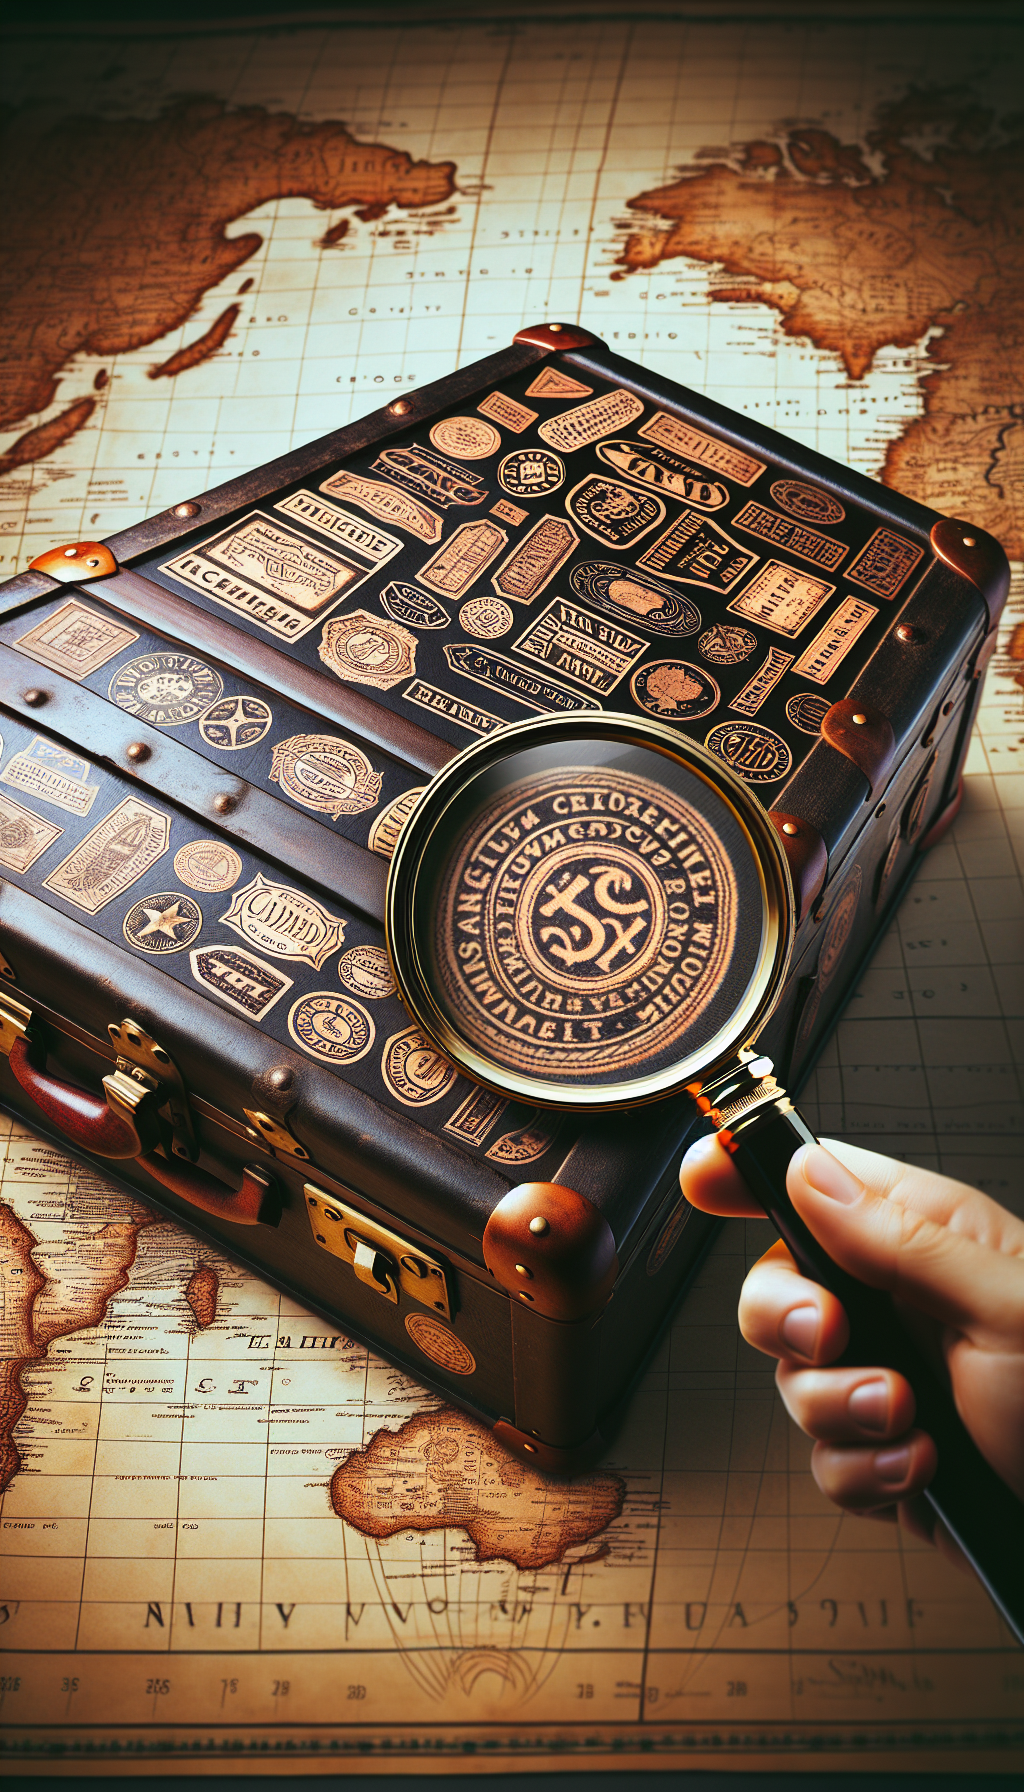 An illustration depicts a magnifying glass held over a classic steamer trunk with discernible signatures and logos from various historic makers etched onto the surface. The trunk sits atop an old world map, indicating its travel heritage. The magnifying glass spotlights some of the unique, intricate brand marks, suggesting the theme of identification and discovery.